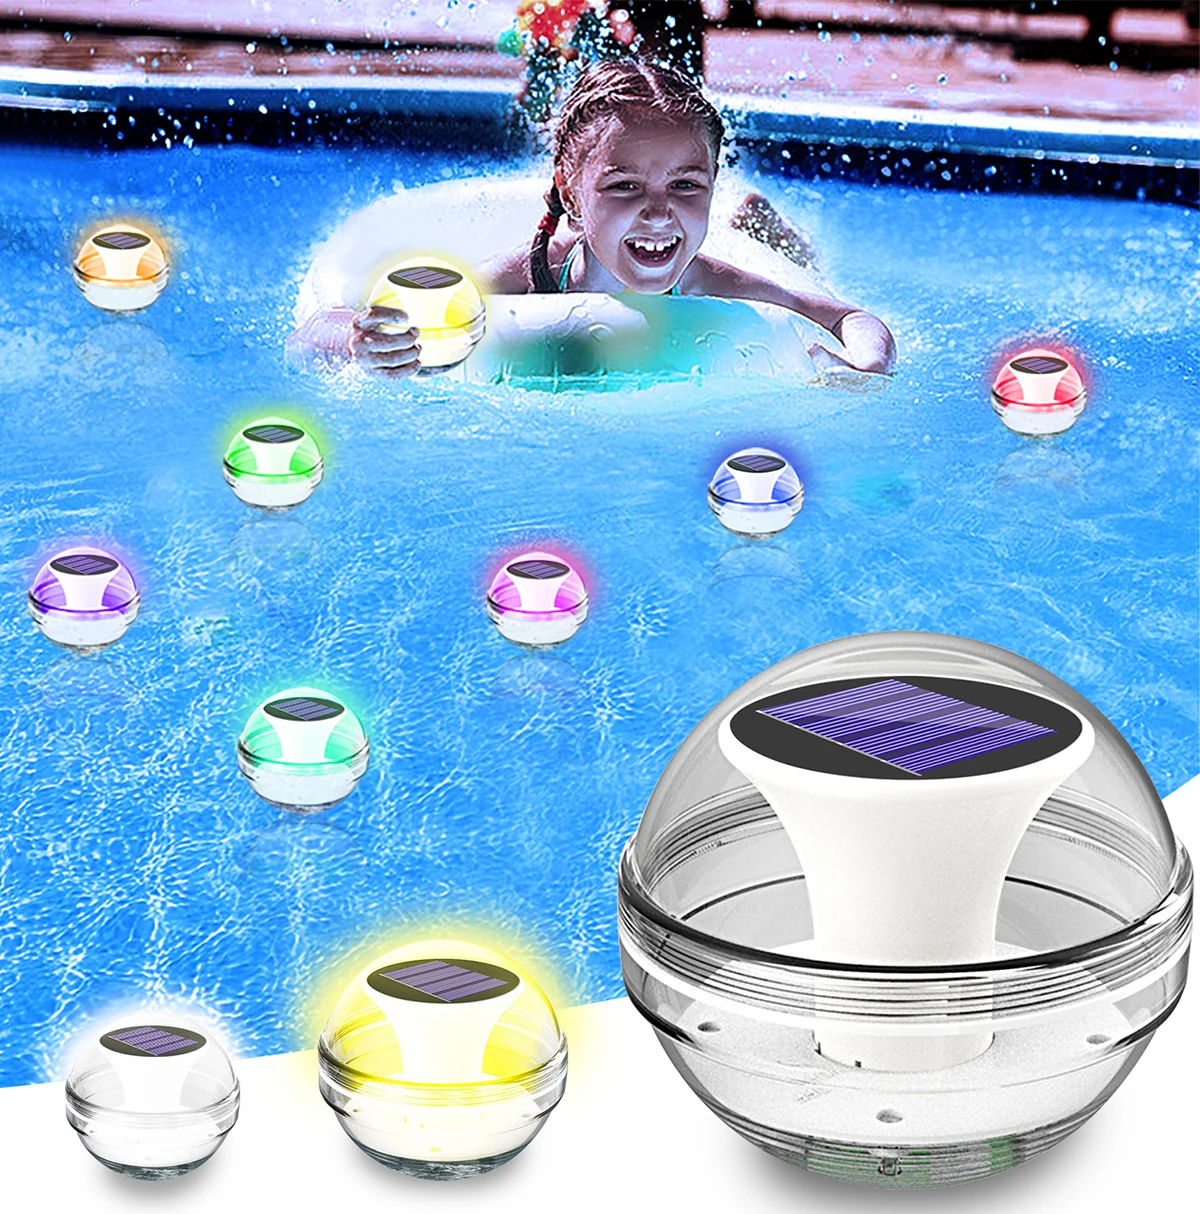 Floating Pool Lights Solar Pool Lights RGB Color Changing IP65 Waterproof LED Night Light for Swimming Pool Hot Tub Pond Decor